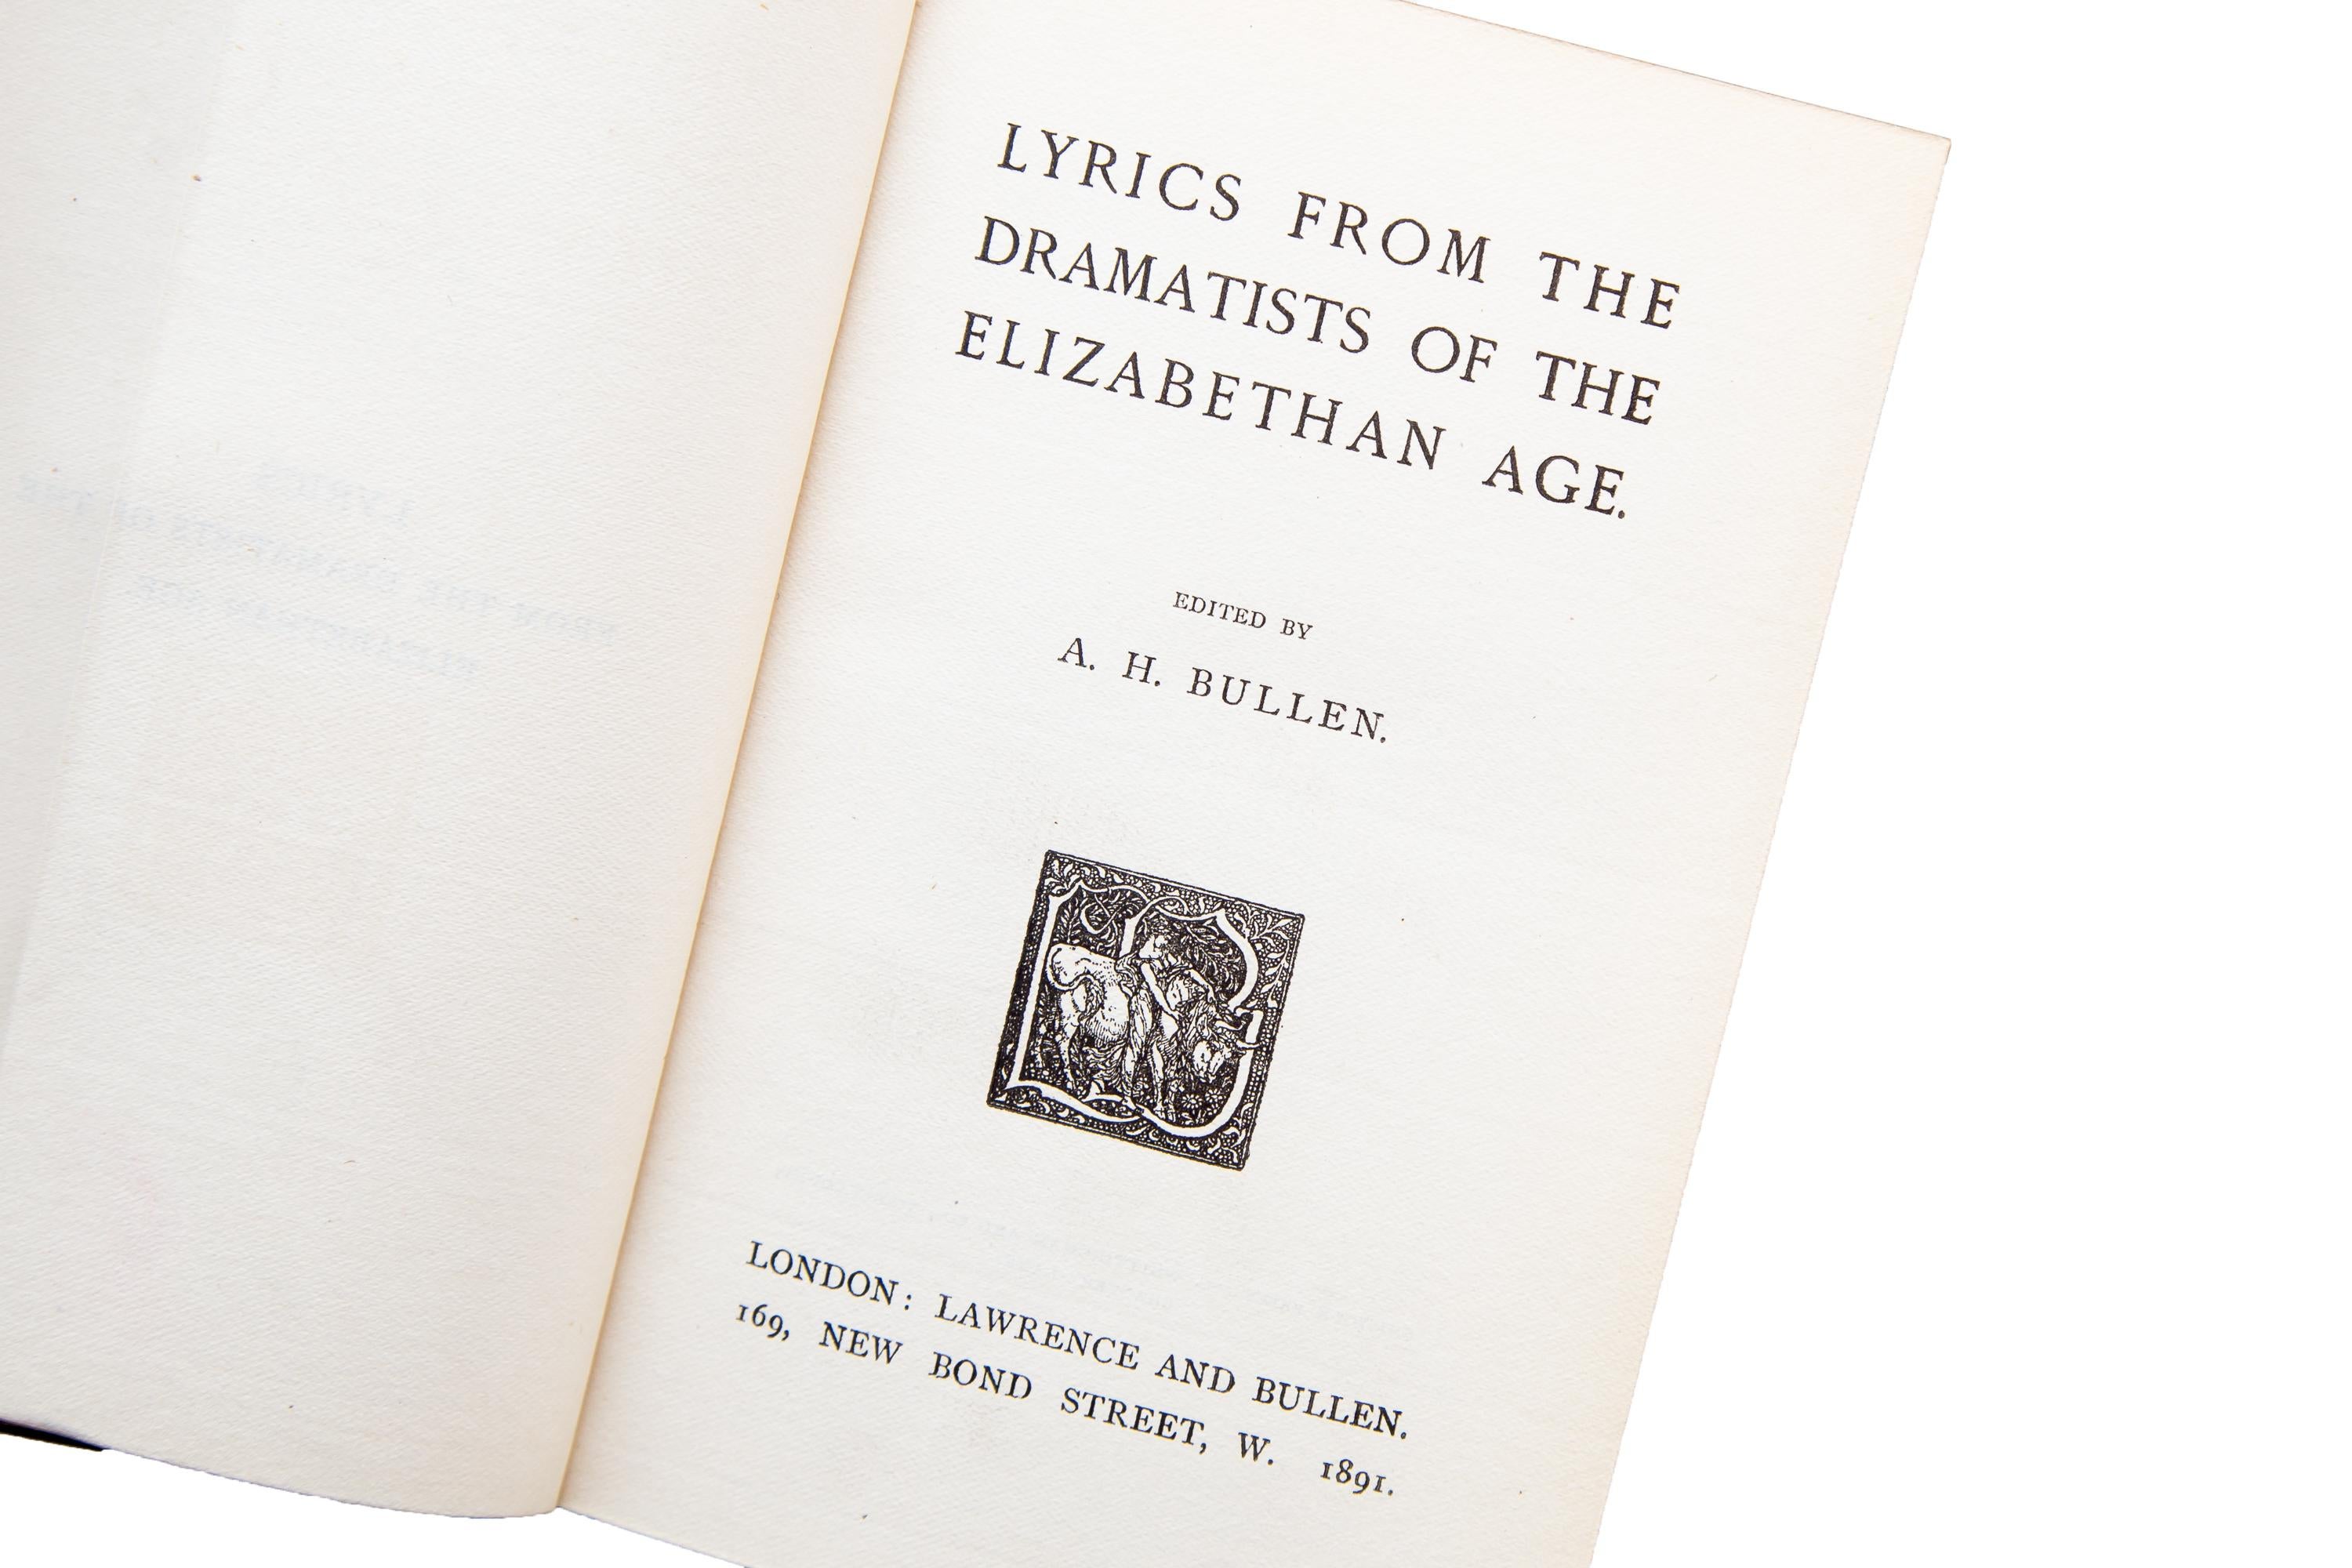 English 1 Volume. A.H. Bullen, Lyrics from the Dramatists of the Elizabethan Age.